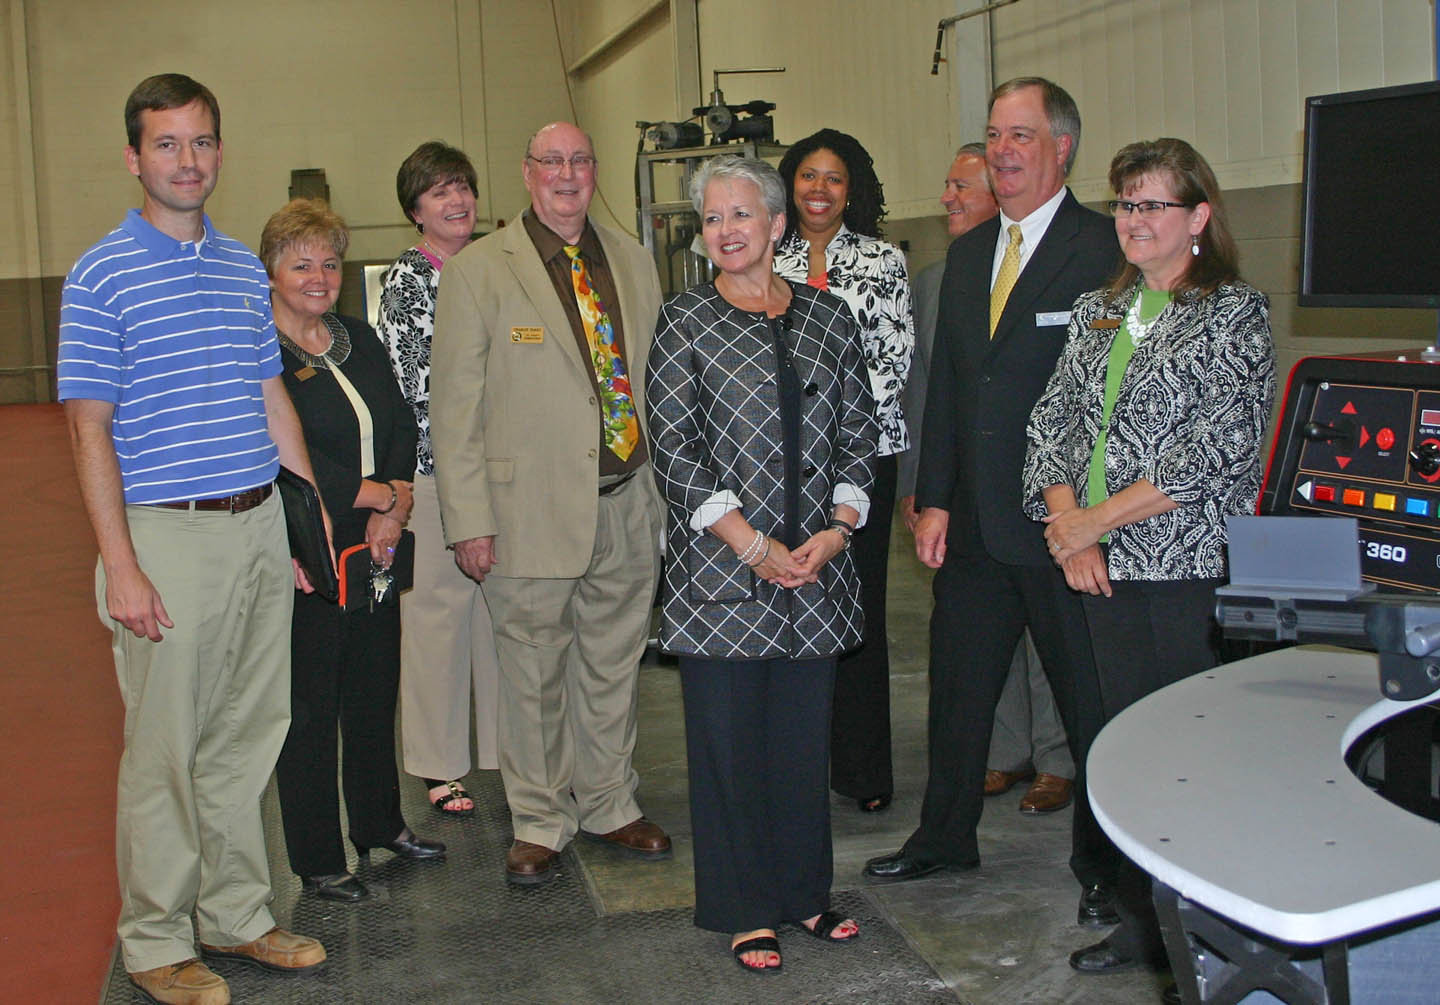 NC Secretary of Commerce impressed by Innovation Center